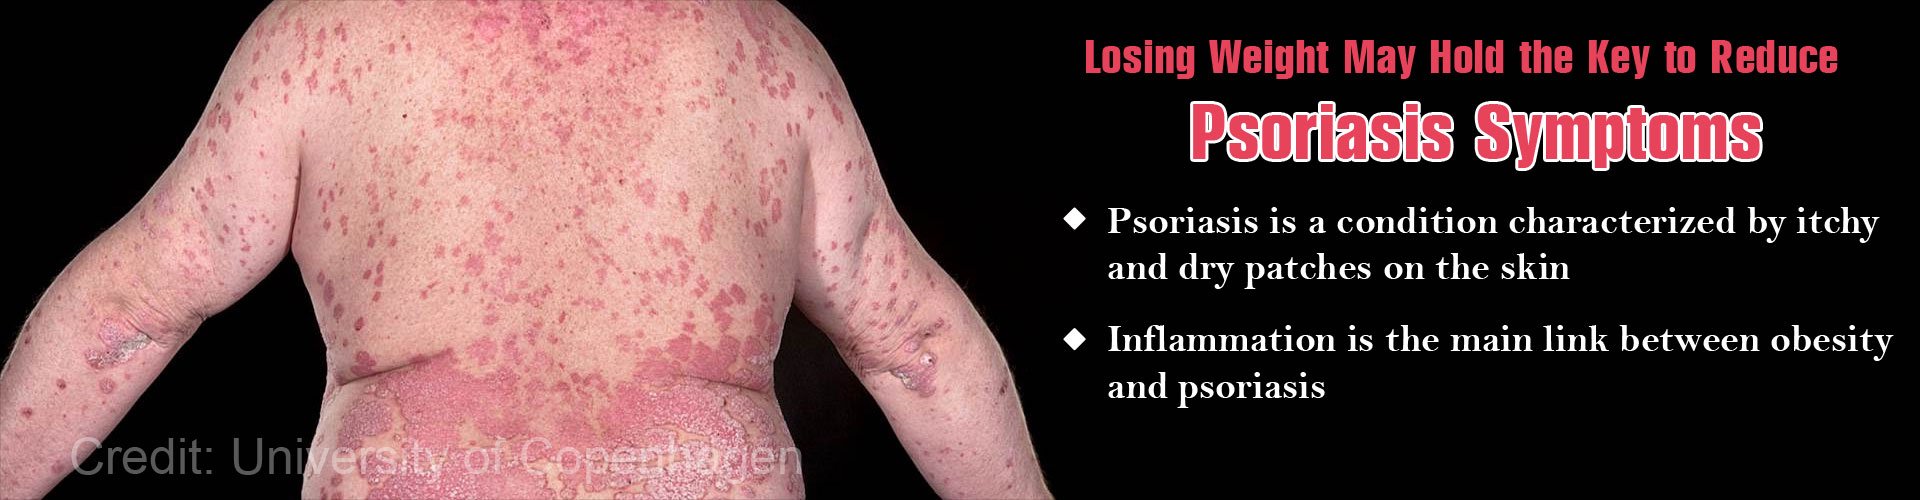 Weight Loss May Show New Hope in the Treatment of Psoriasis